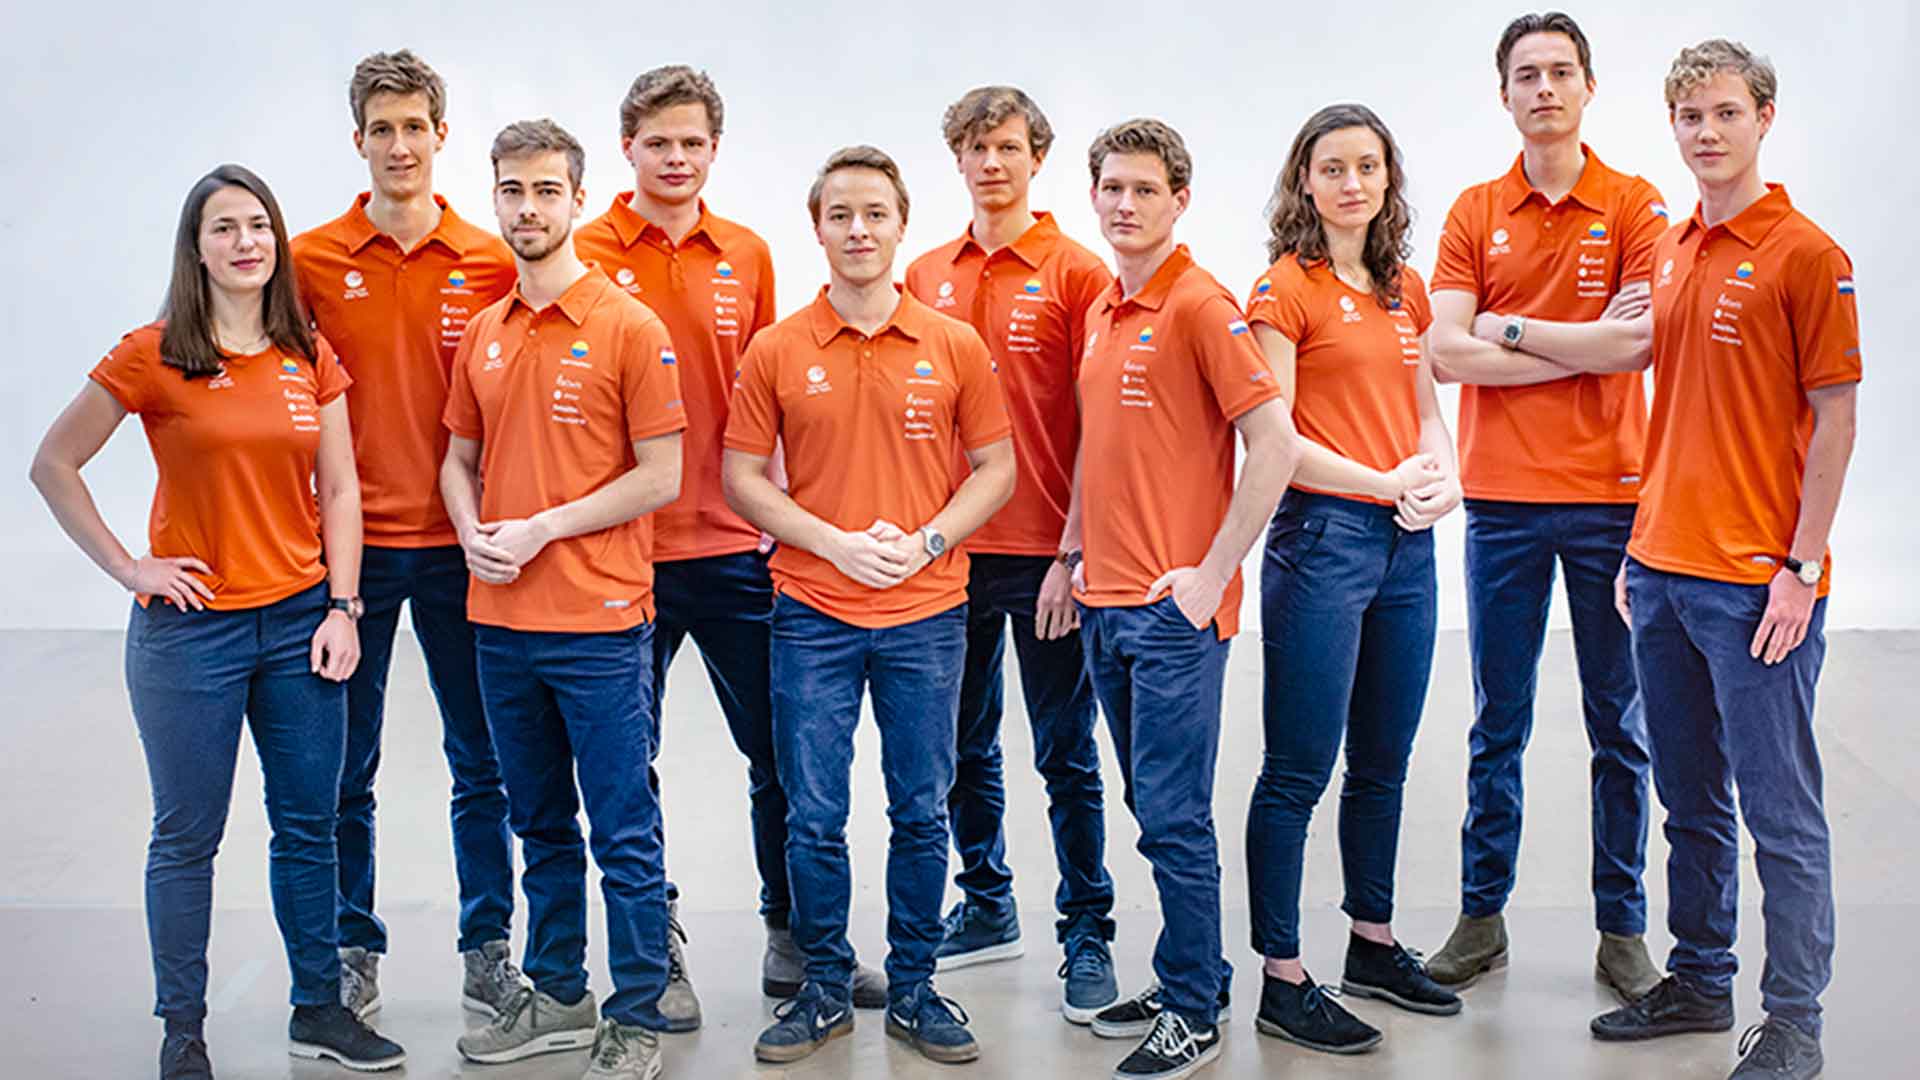 COVID-19 prevents the Vattenfall Solar Team from competing in the 2020 American Solar Challenge